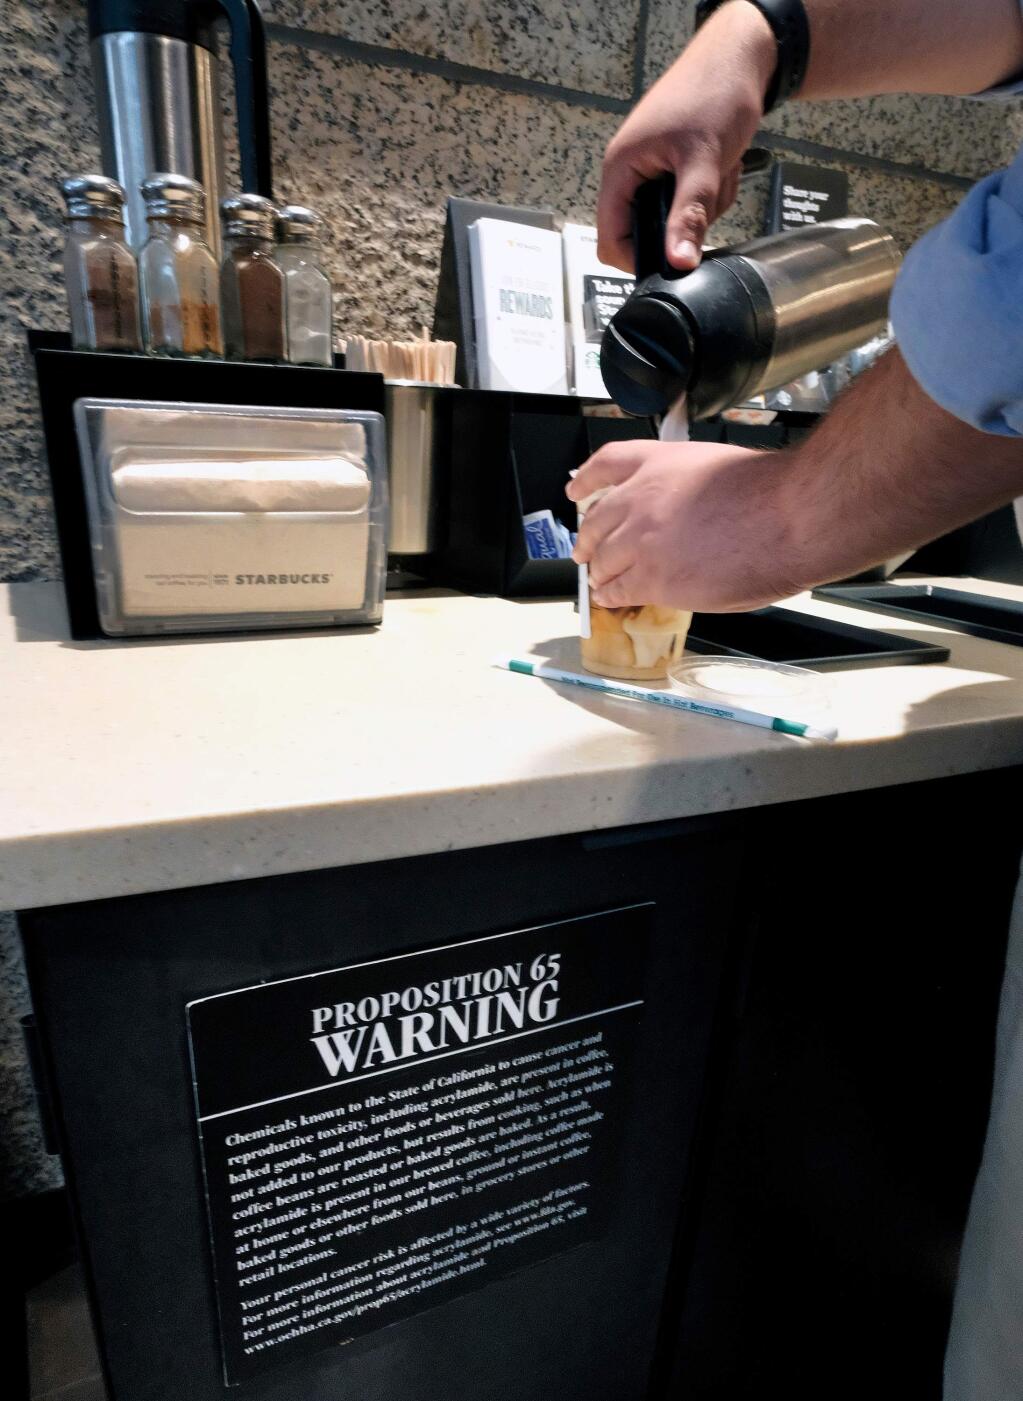 FILE -In In this Sept. 22, 2017, file photo, a customer pours milk into coffee near a posted Proposition 65 warning sign at a Starbucks coffee shop in Los Angeles. Superior Court Judge Elihu Berle has ruled that California law requires coffee companies to carry an ominous cancer warning label because of a chemical produced in the roasting process. Judge Berle wrote in a proposed ruling Wednesday, March 28, 2018, that Starbucks and other coffee companies failed to show that the threat from a chemical compound produced in the roasting process was insignificant. At the center of the dispute is acrylamide, a carcinogen found in many cooked foods, that is produced during the roasting process. (AP Photo/Richard Vogel)